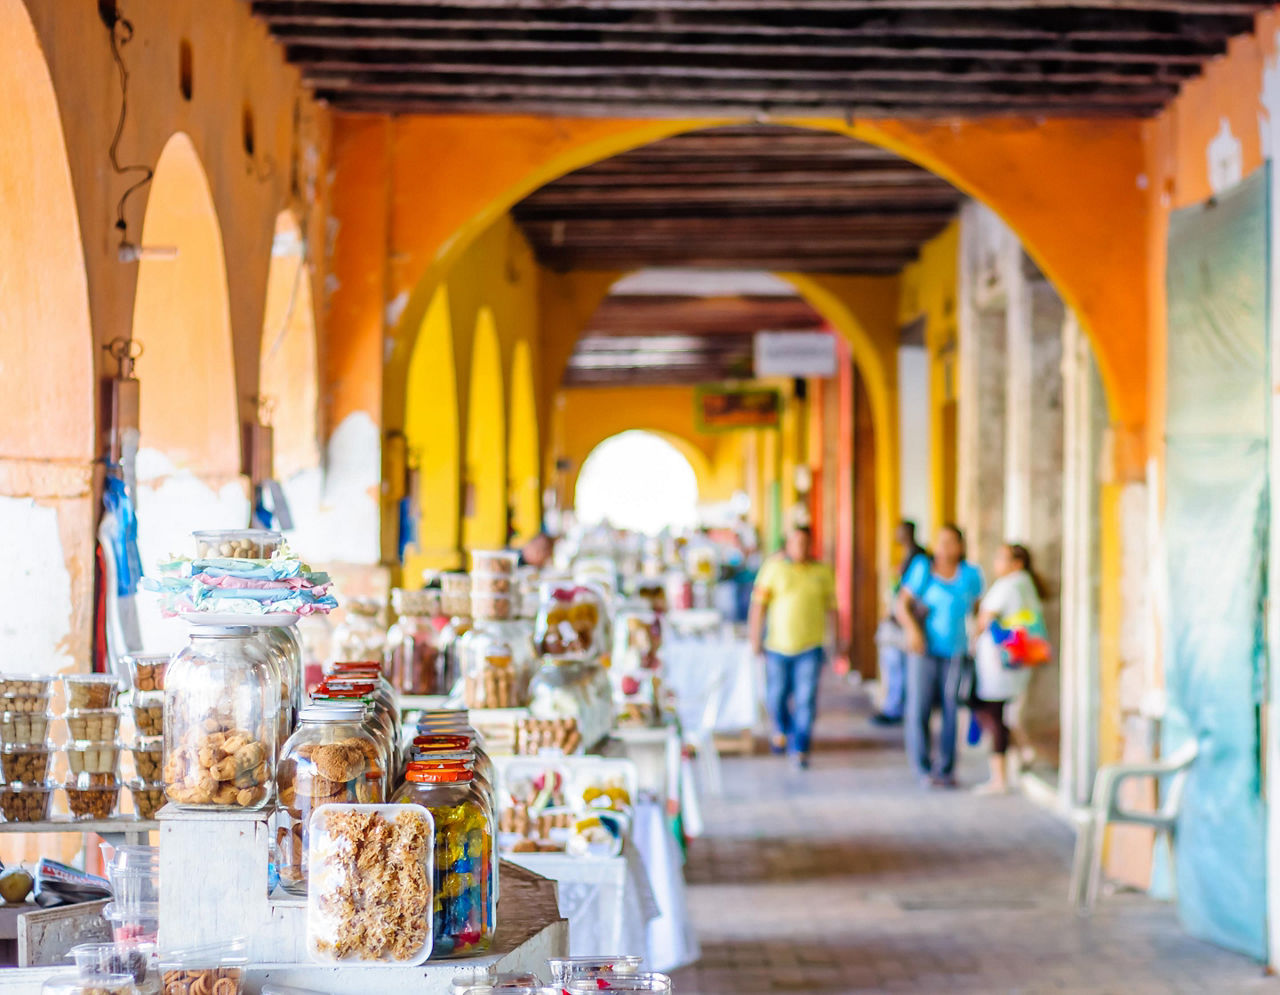 An outdoor market under a covered walkway in Cartagena, Colombia